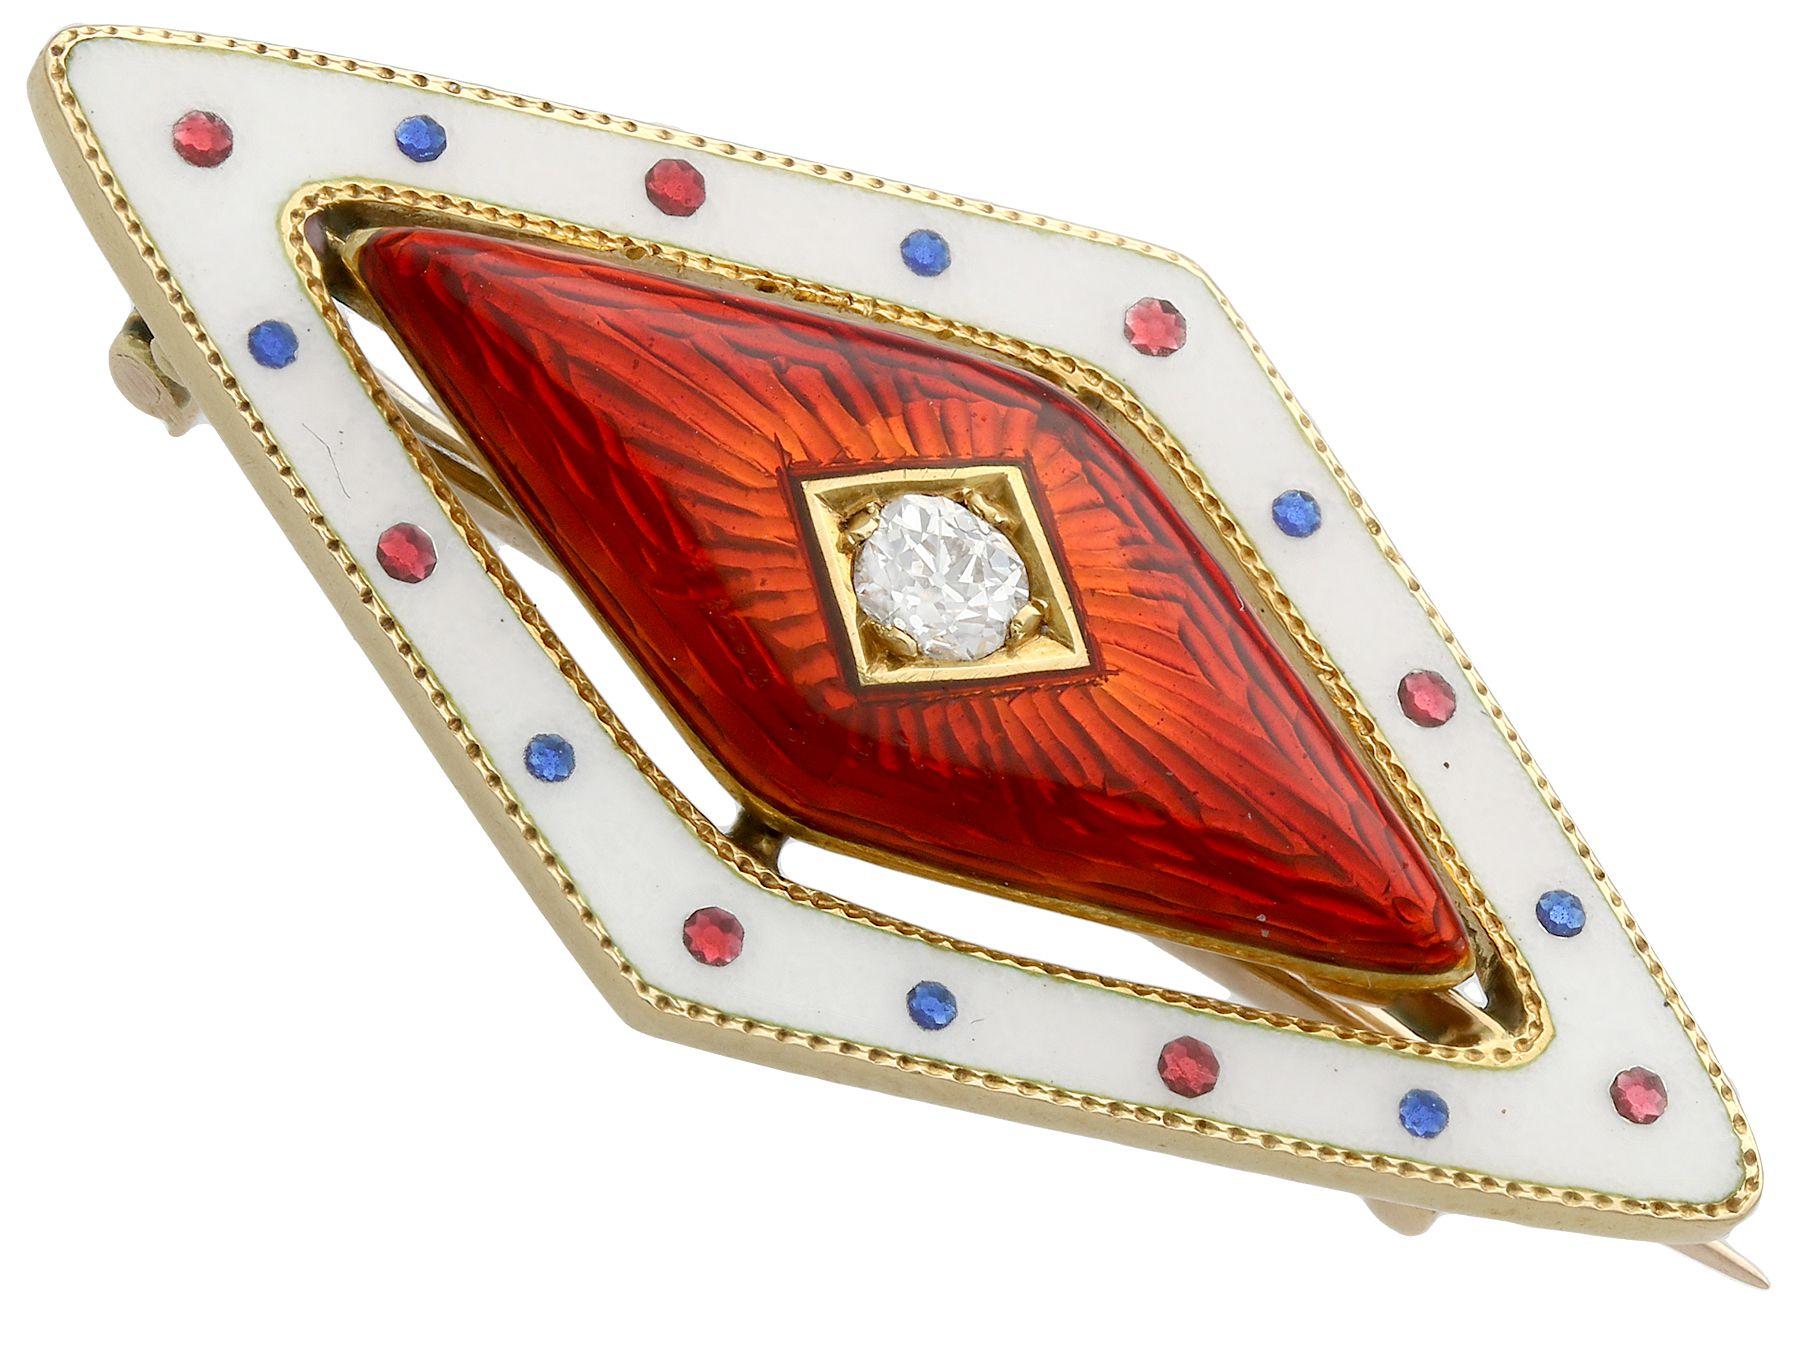 A fine and impressive antique Victorian 0.07 carat diamond and enamel, 18 karat yellow gold brooch; part of our diverse antique jewelry and estate jewelry collections.

This fine and impressive Victorian brooch has been crafted in 18k yellow